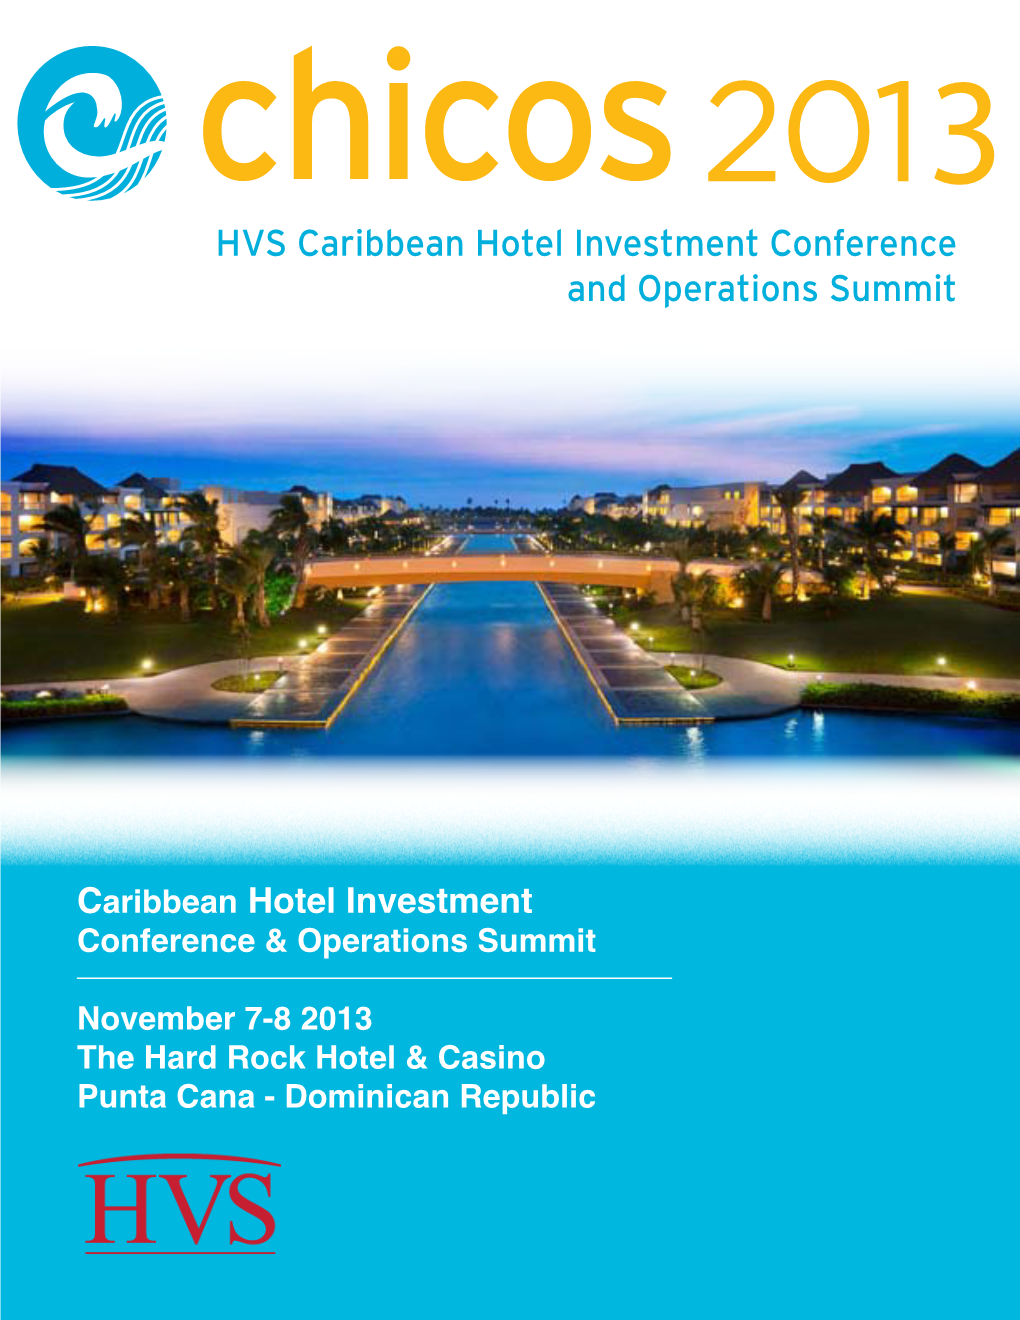 Caribbean Hotel Investment Conference & Operations Summit